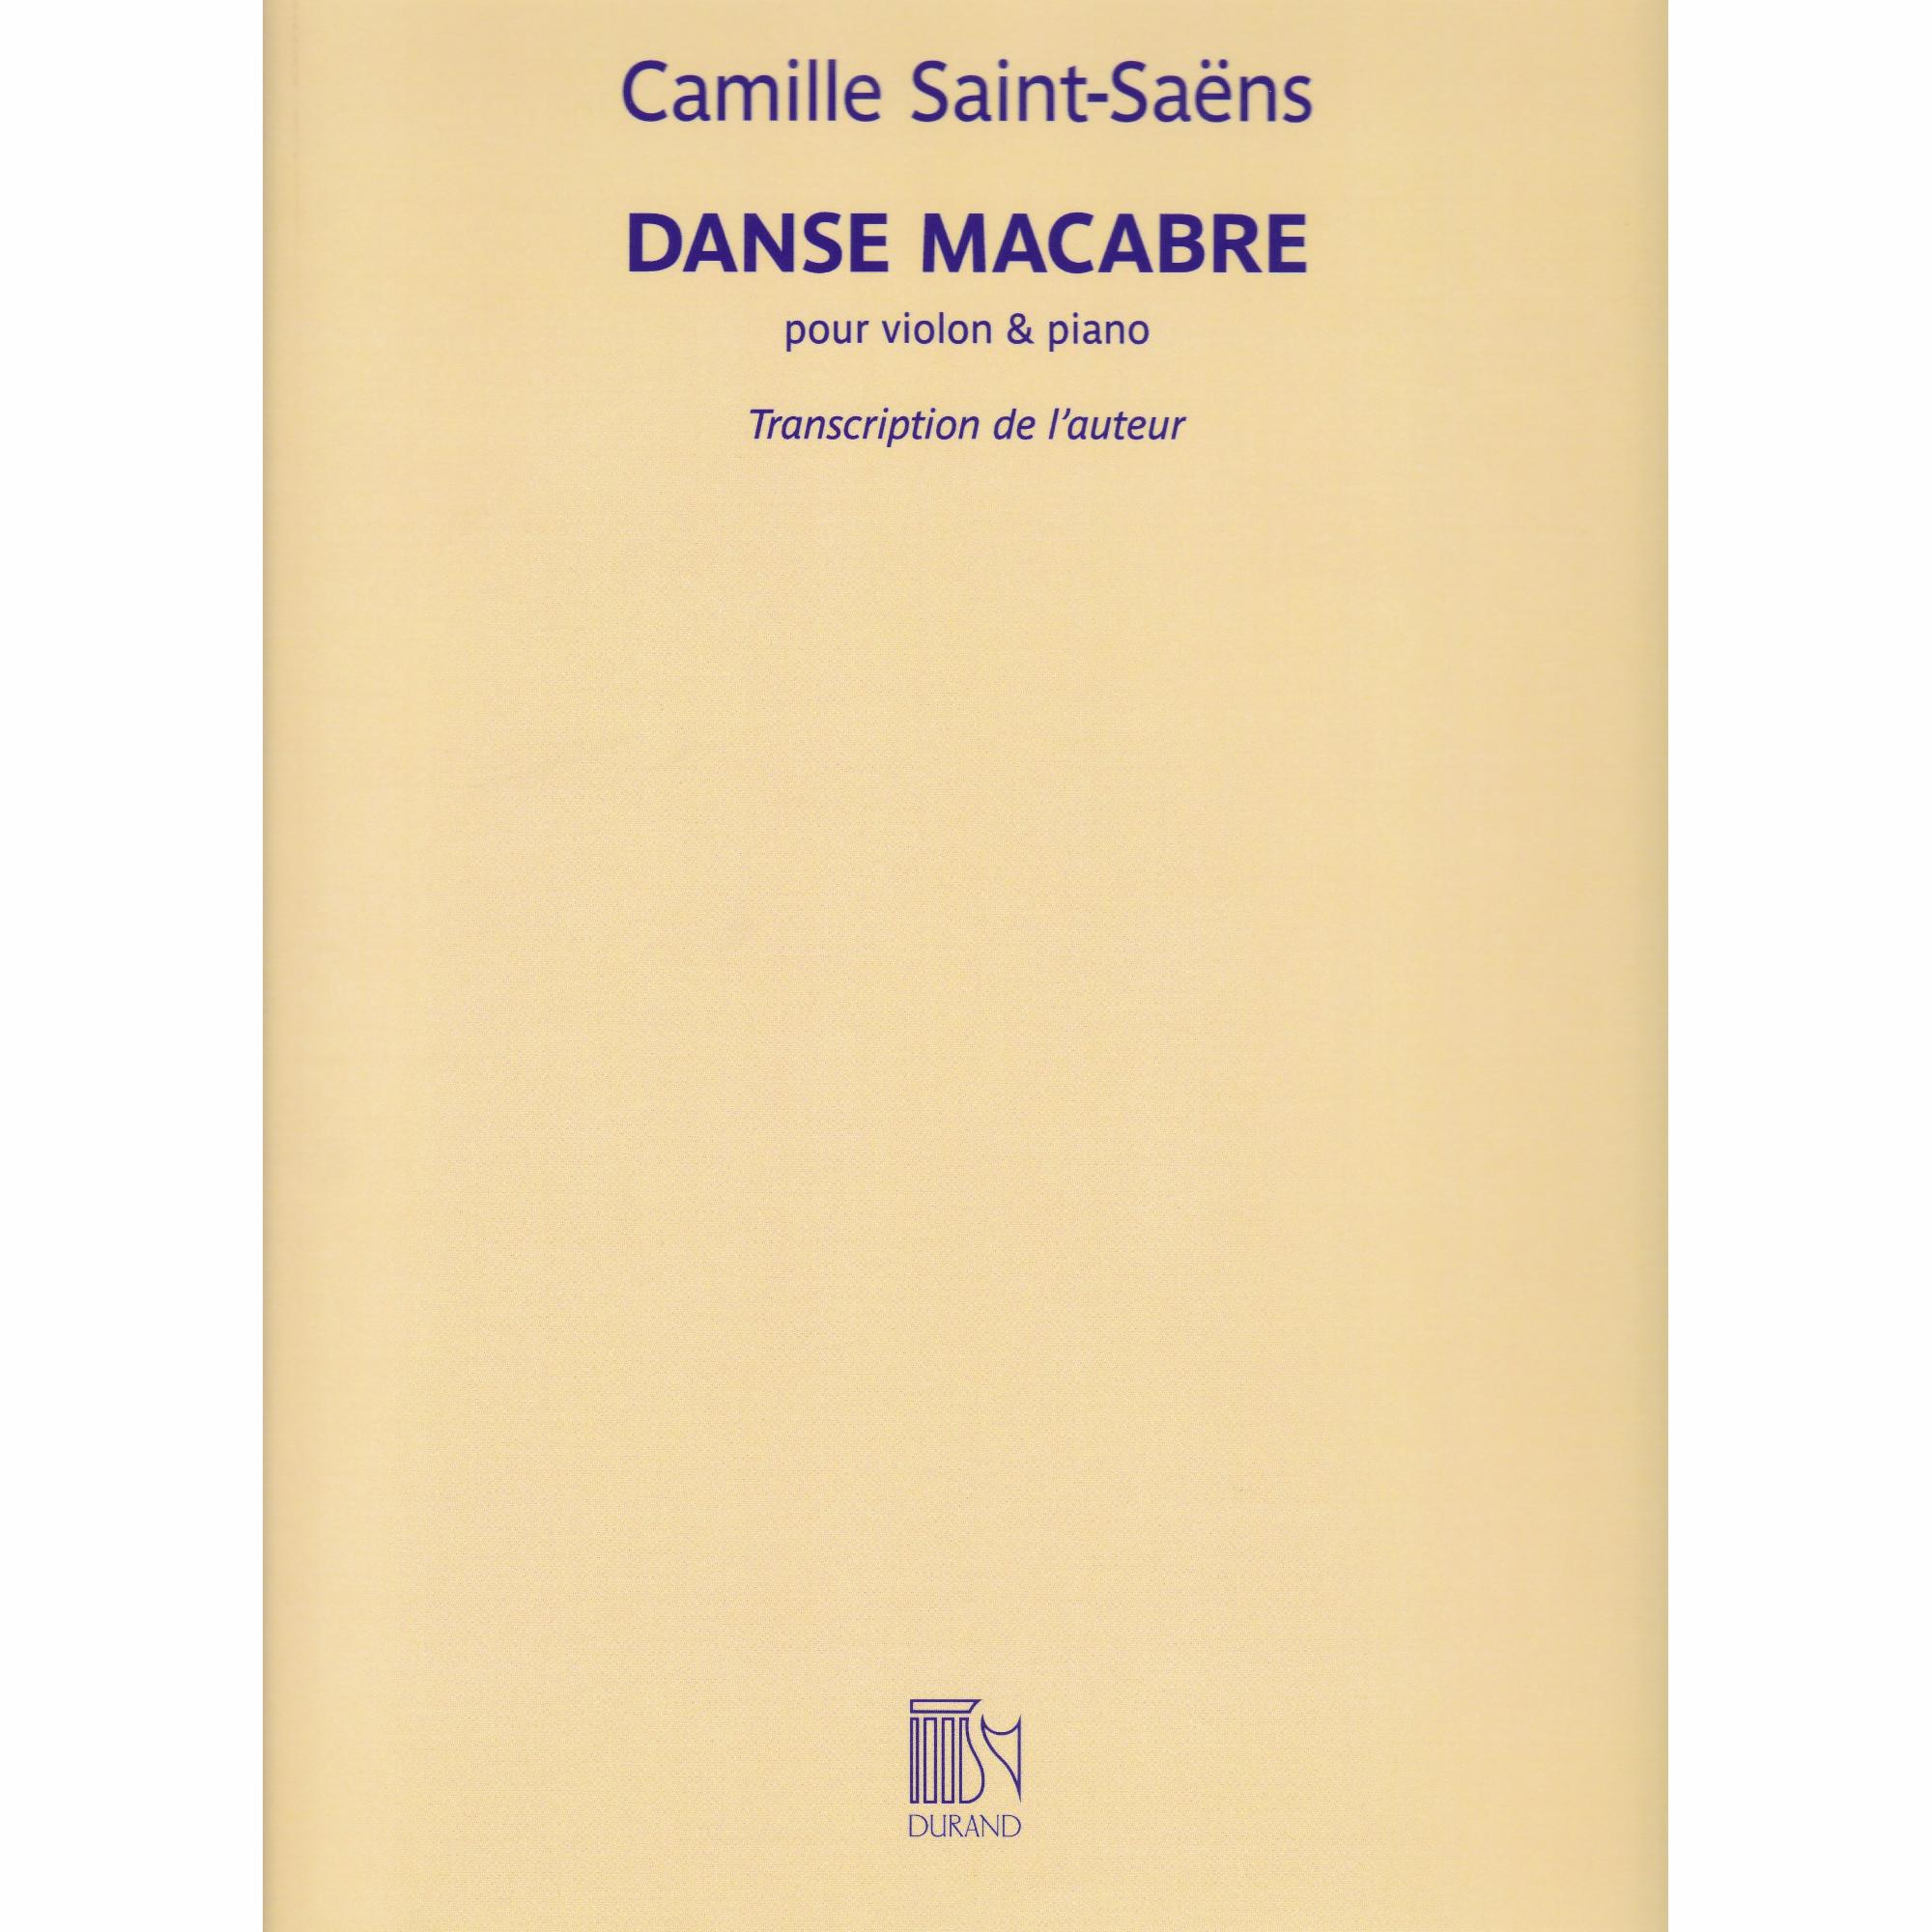 Saint-Saens -- Danse Macabre, Op. 40 for Violin or Cello and Piano